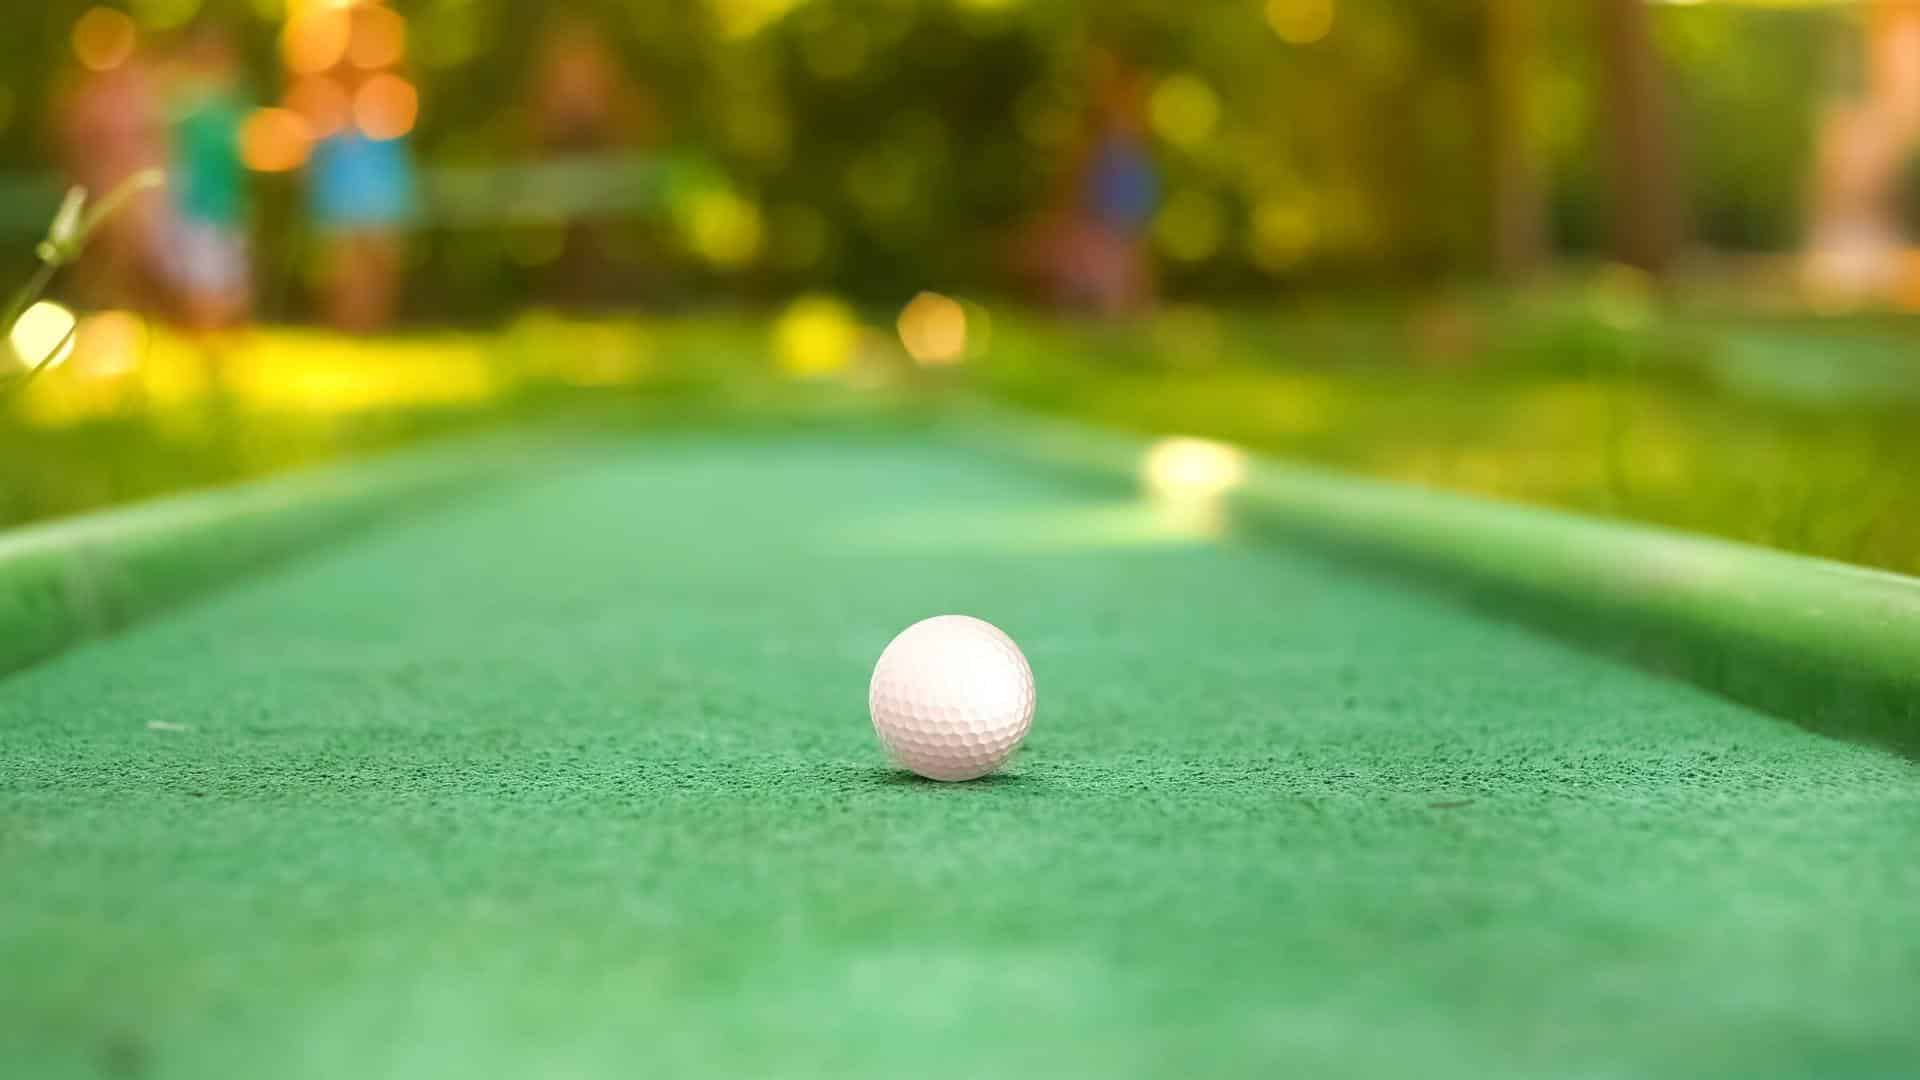 Putt Putt in Orlando - Where to Tee Off